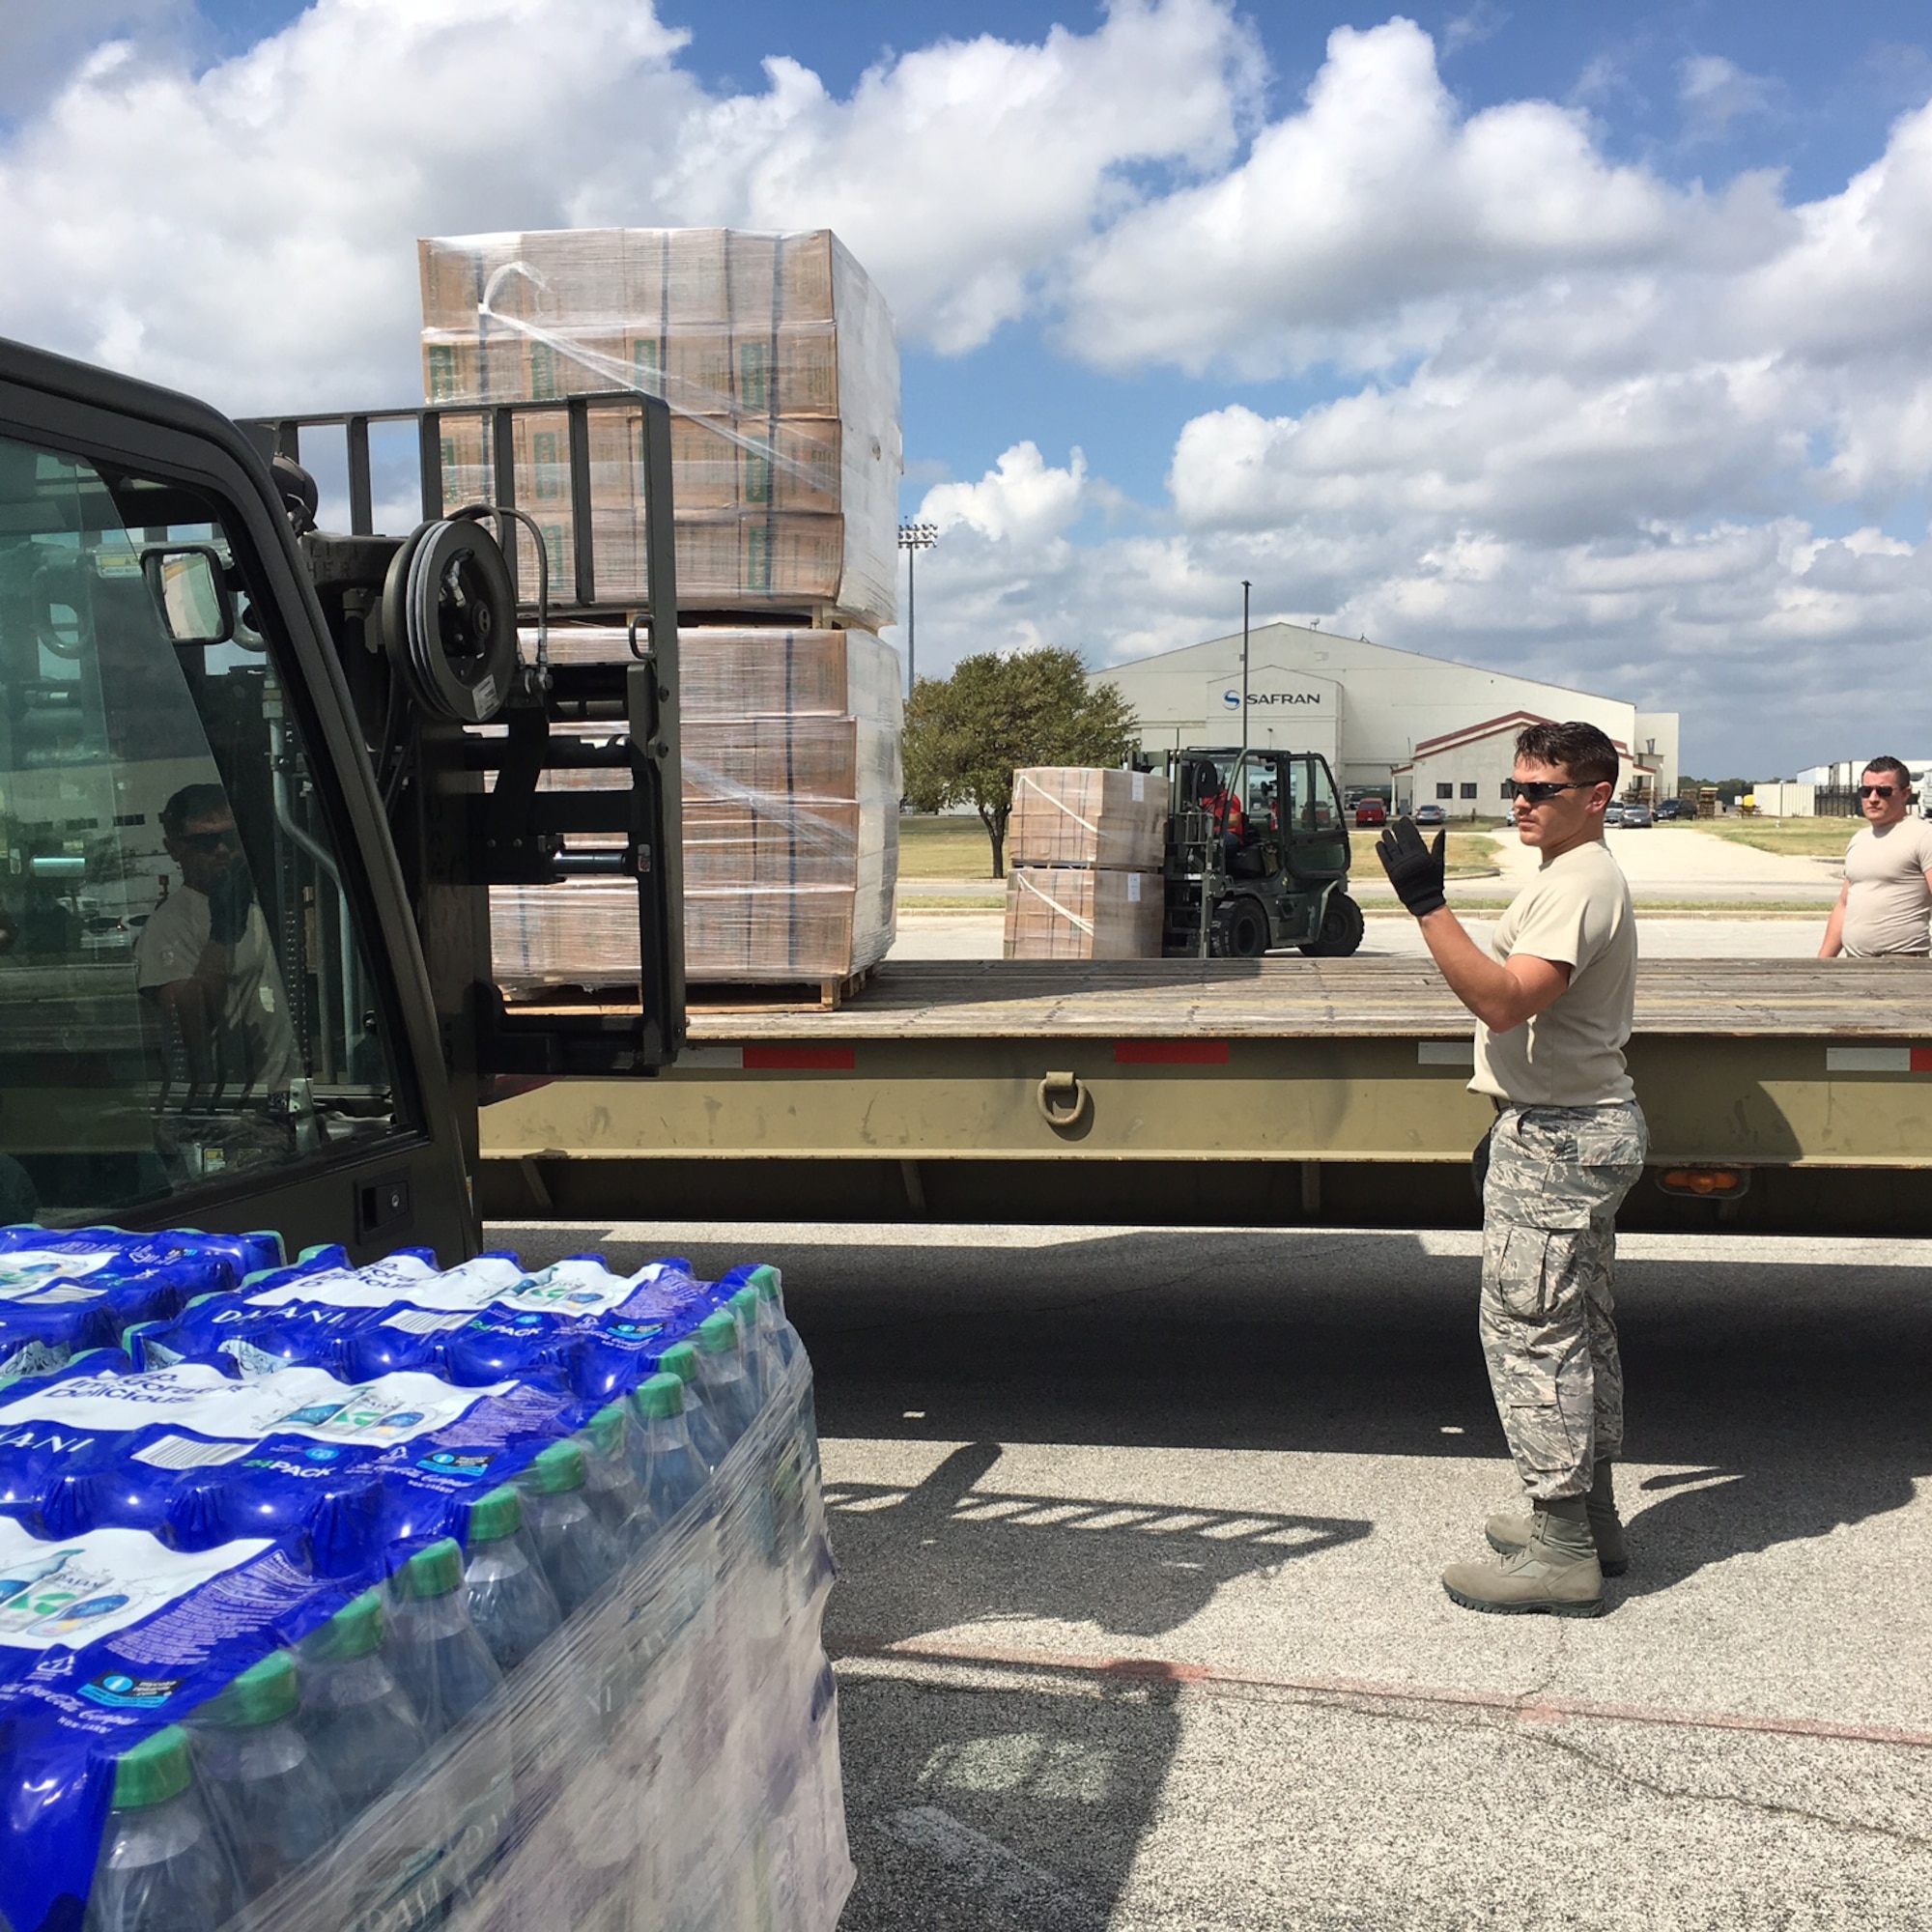 Second Lt. Alberto, 12th Training Squadron student, helps load relief supplies in preparation for air transport Sept. 22, 2017 at Joint Base San Antonio-Kelly Field.  The supplies were being staged at the Federal Emergency Management Agency’s Incident Support Base at Kelly for transport to areas devastated by Hurricane Maria. (U.S. Air Force image/Dan Hawkins)